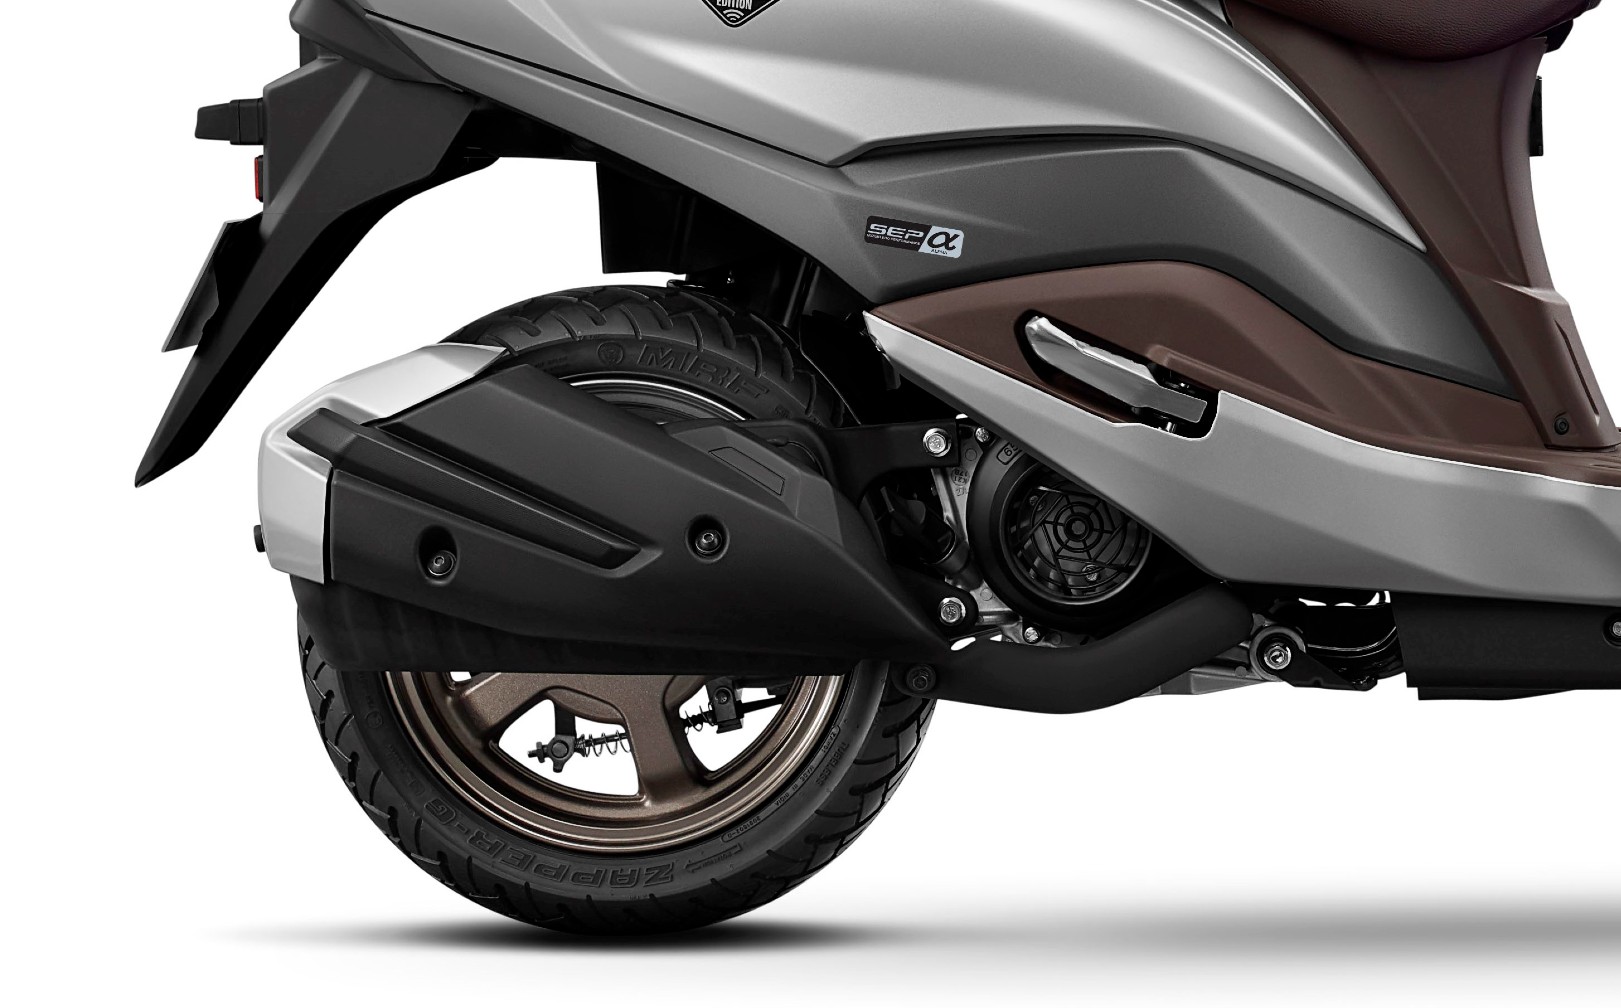 Wheeltek Main - The all-new Suzuki Burgman 125 street. SUZUKI BURGMAN P  76,900 Cash Payment Price may vary in other areas and may change without  prior notice. Stock and color variations are